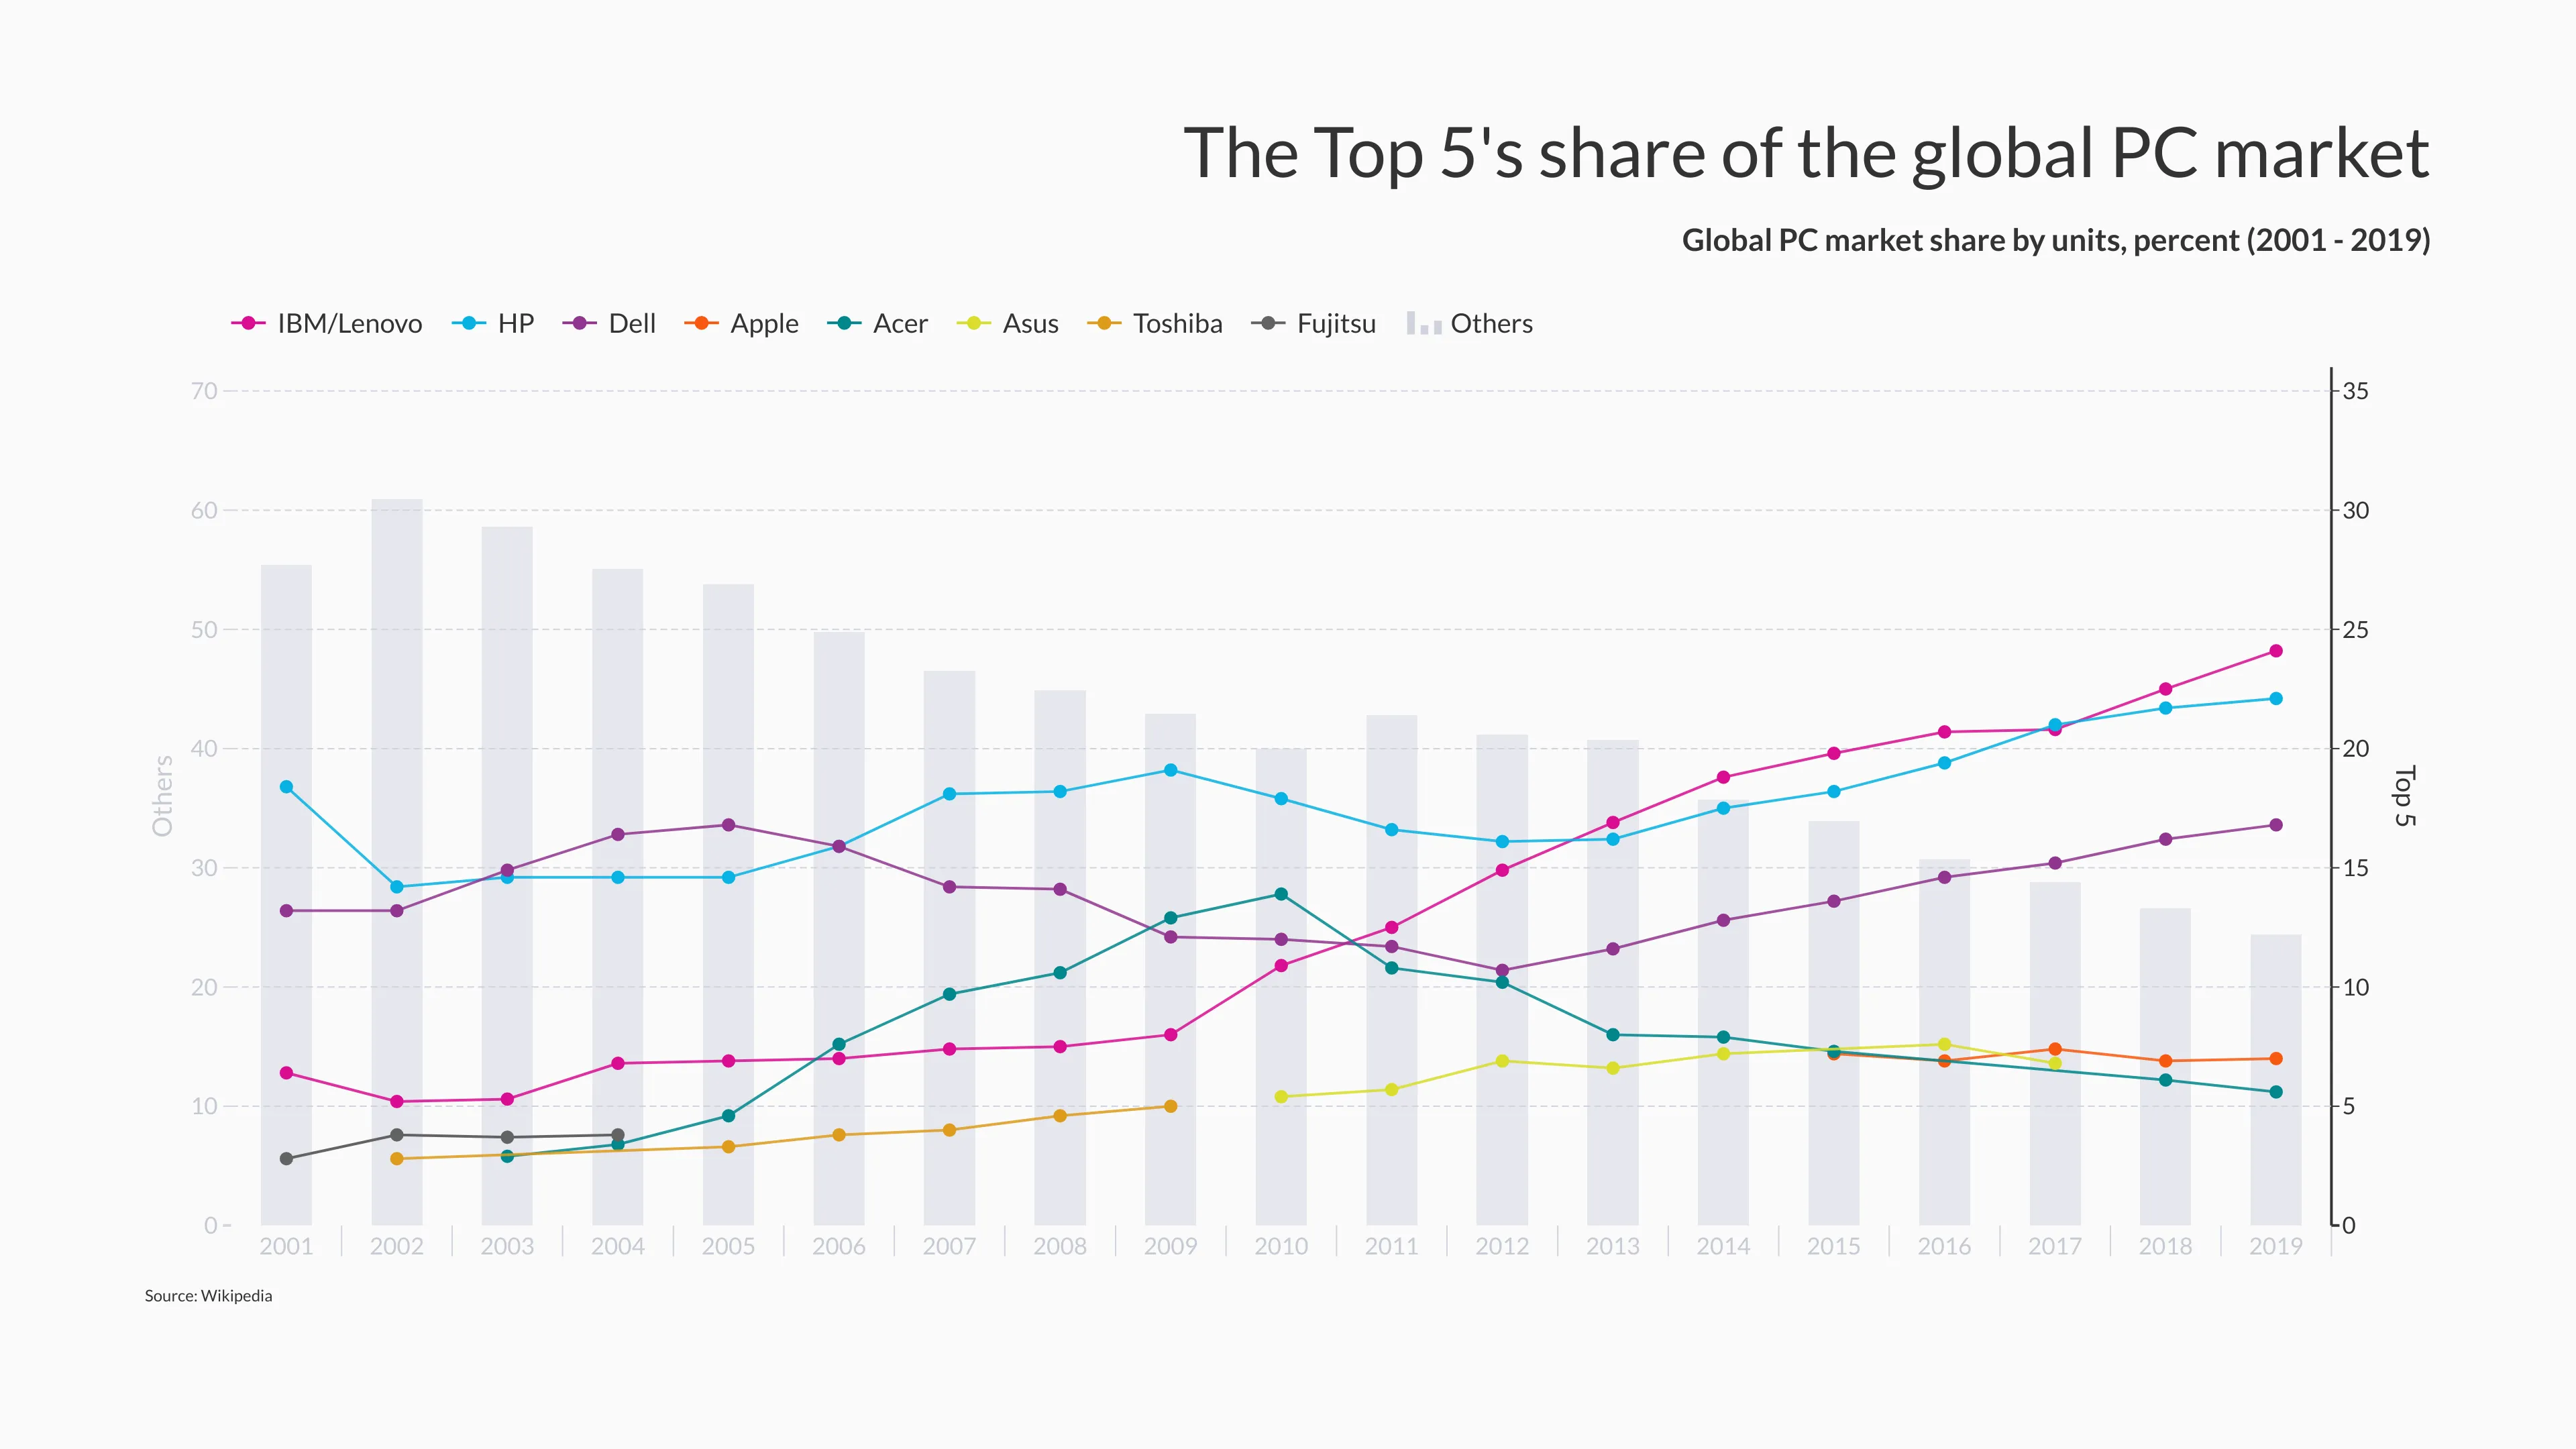 The Top 5's share of the global PC market